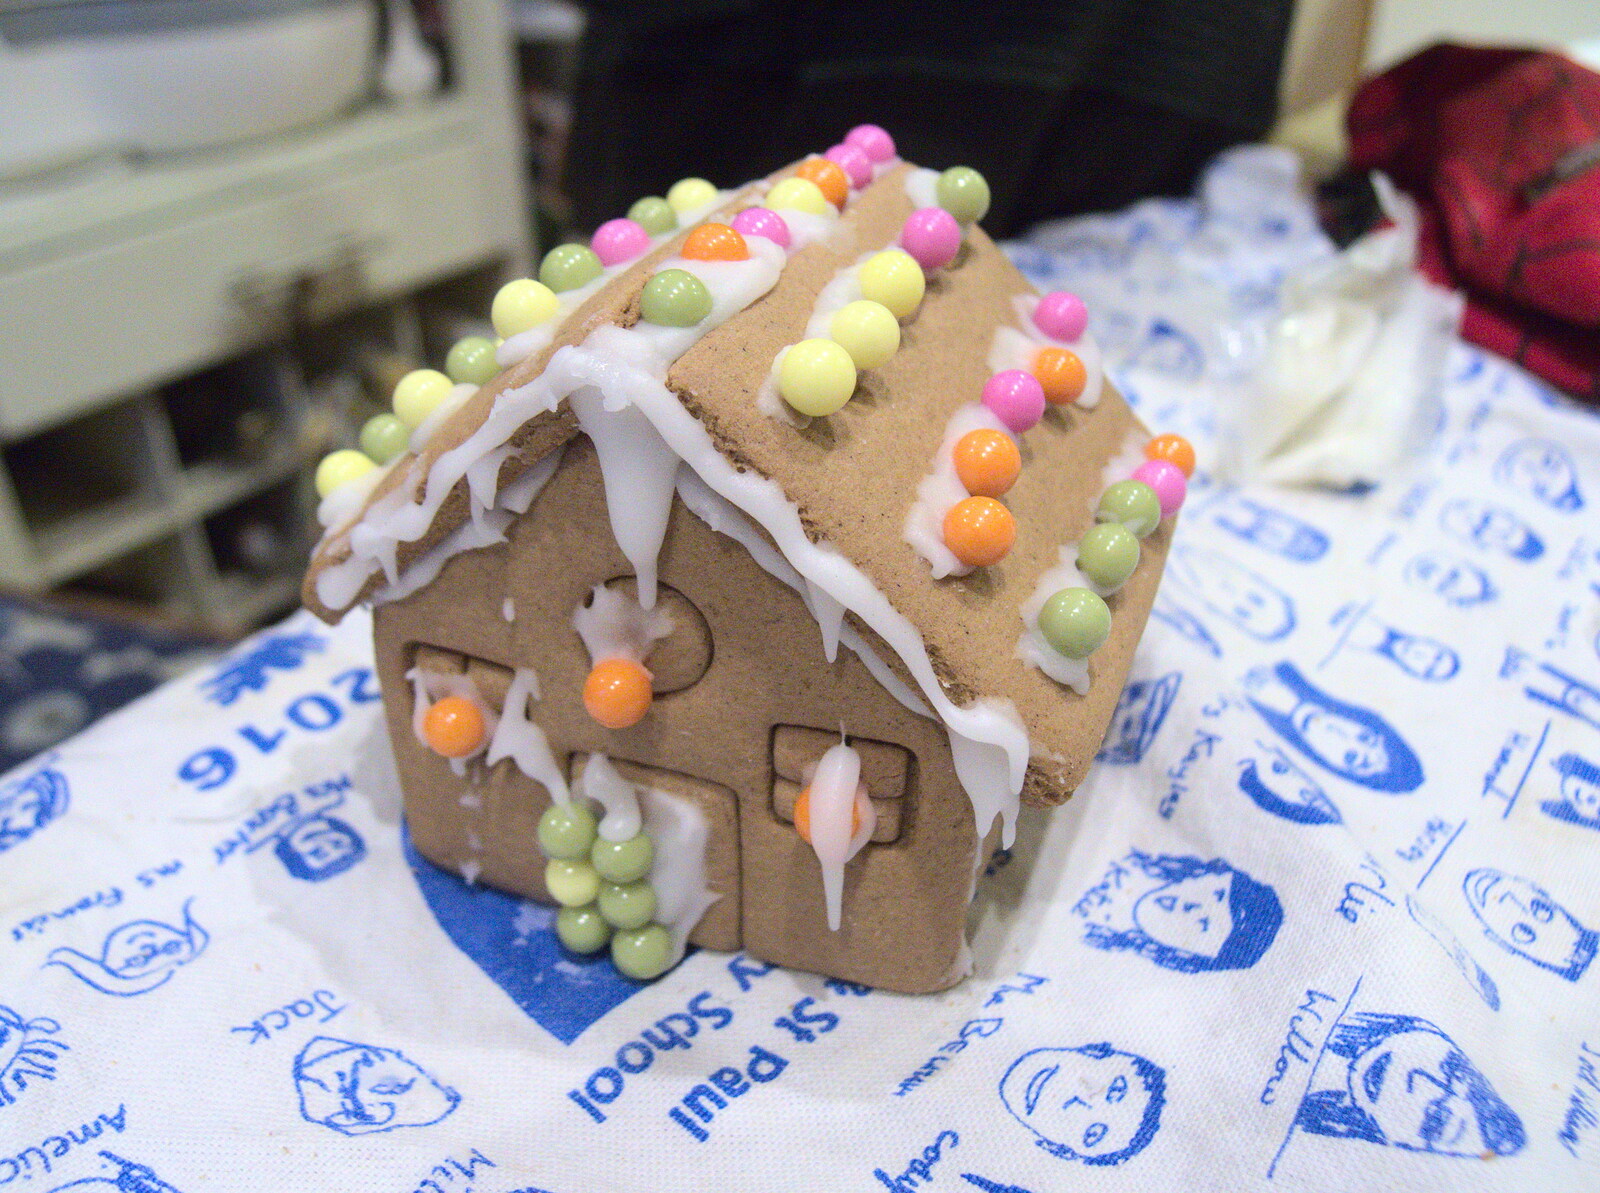 Fred's iced gingerbread house from New Year's Eve in Spreyton, Devon - 31st December 2017